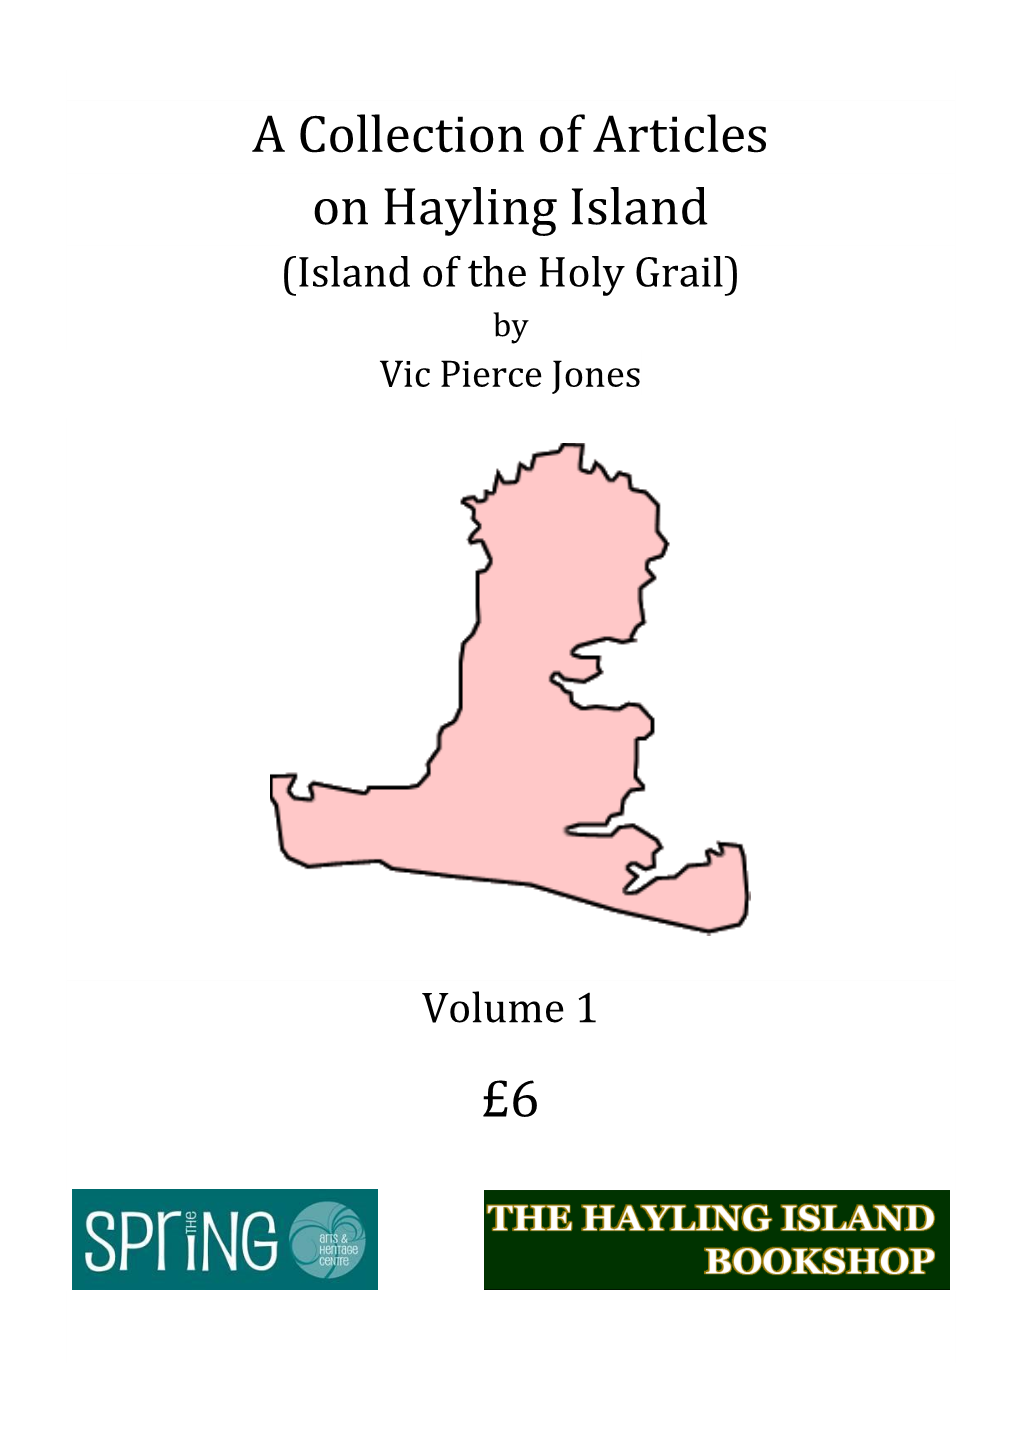 A Collection of Articles on Hayling Island (Island of the Holy Grail) by Vic Pierce Jones